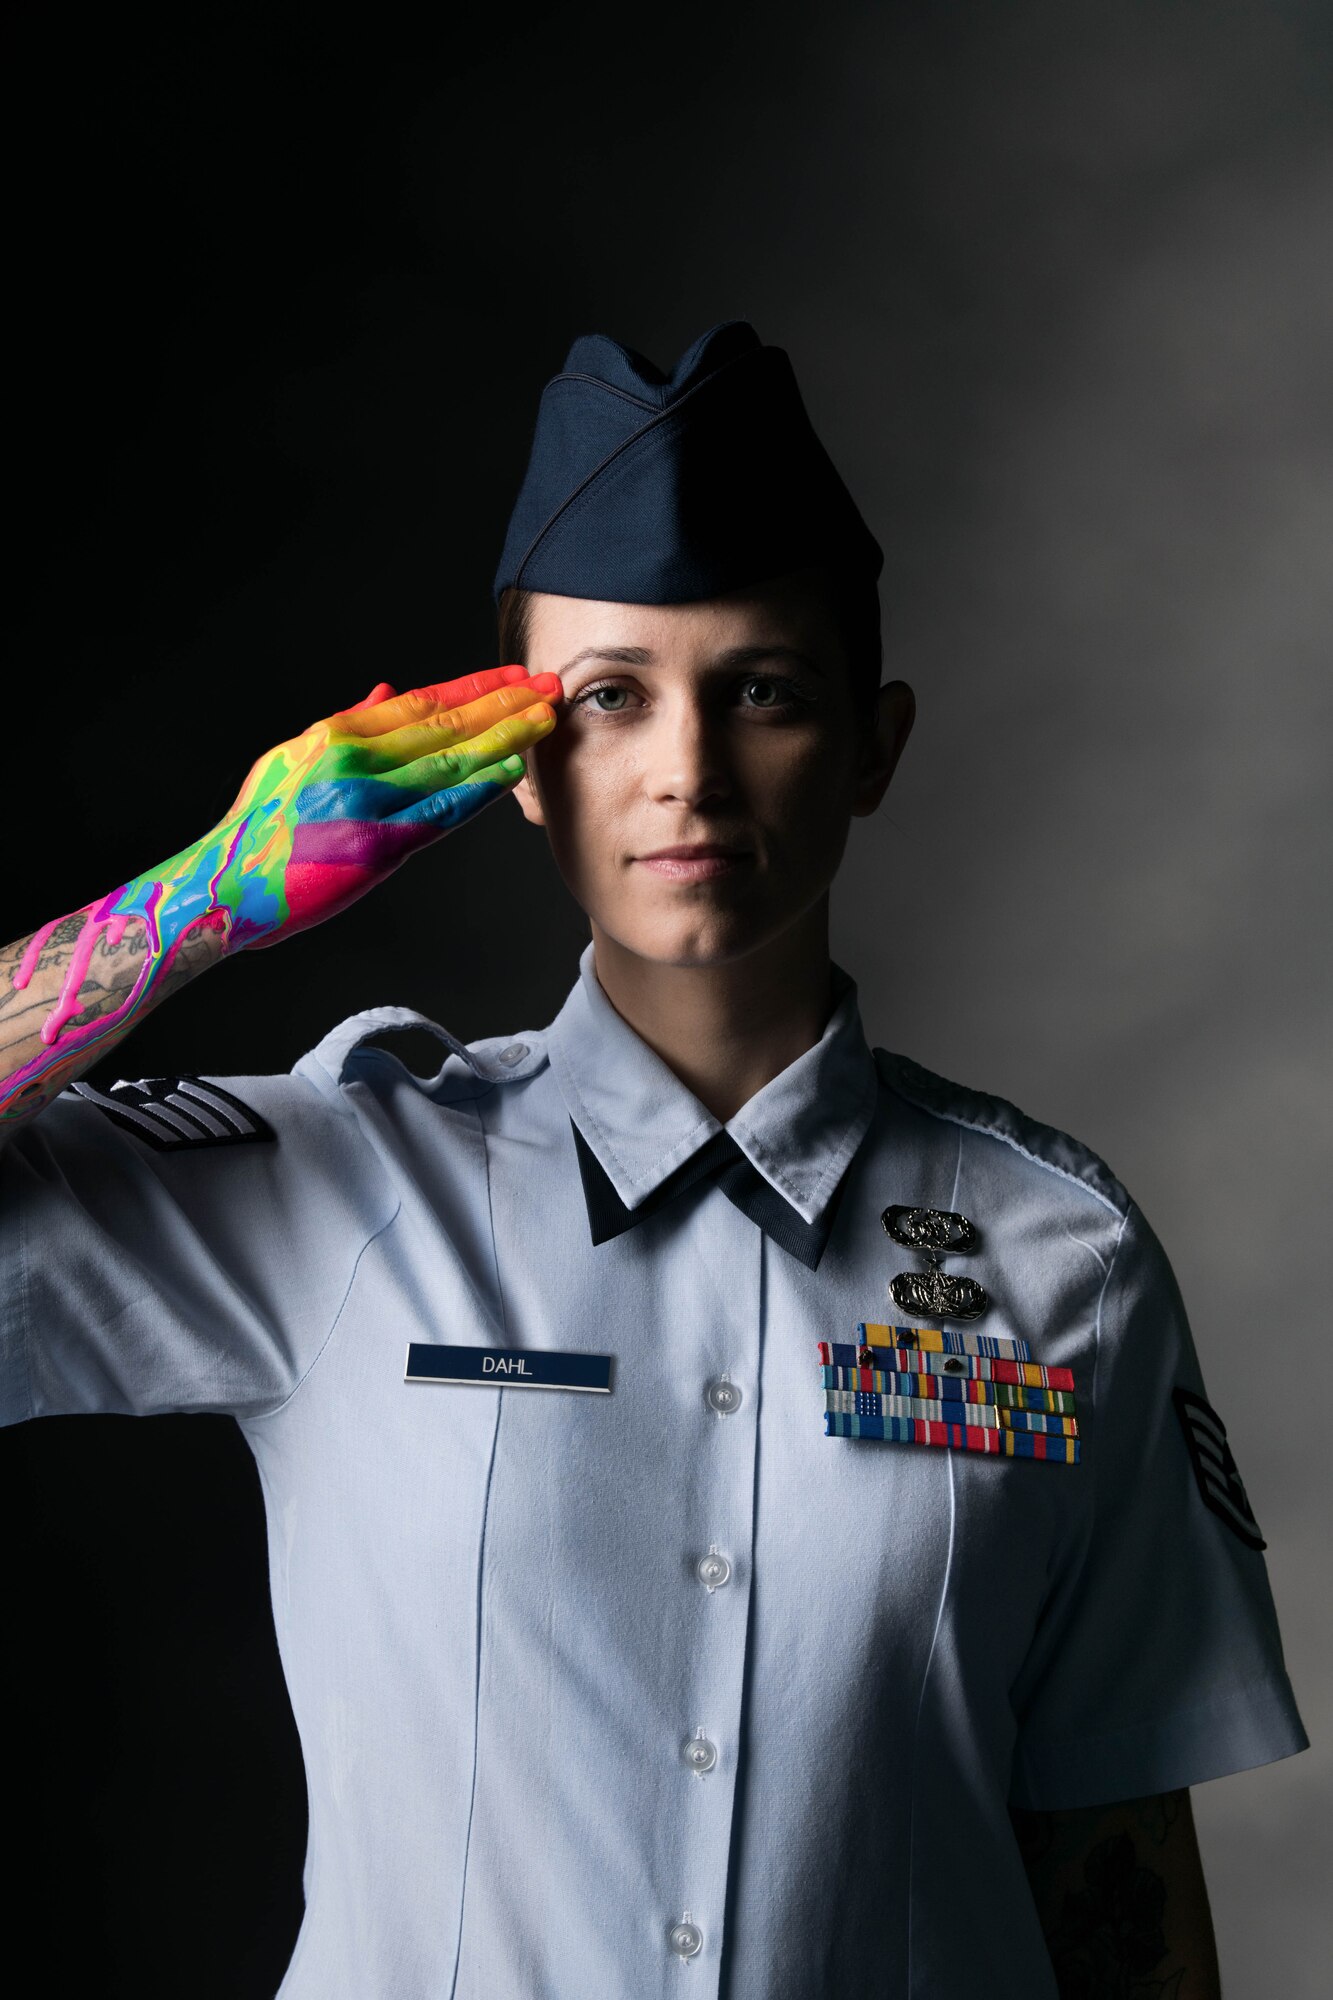 Staff Sgt. Bryanna Dahl, 436th Airlift Wing occupational safety technician, salutes with a rainbow painted on her hand at Dover Air Force Base, Delaware, May 26, 2021. The Department of Defense recognizes June as Pride Month, celebrating the history of LGBTQ service members who have bravely served and sacrificed in the U.S. military. Pride Month also upholds the DoD’s commitment to diversity and inclusion in all military branches. (U.S. Air Force photo illustration by Mauricio Campino) (Multiple photographs were combined to create a final portrait)